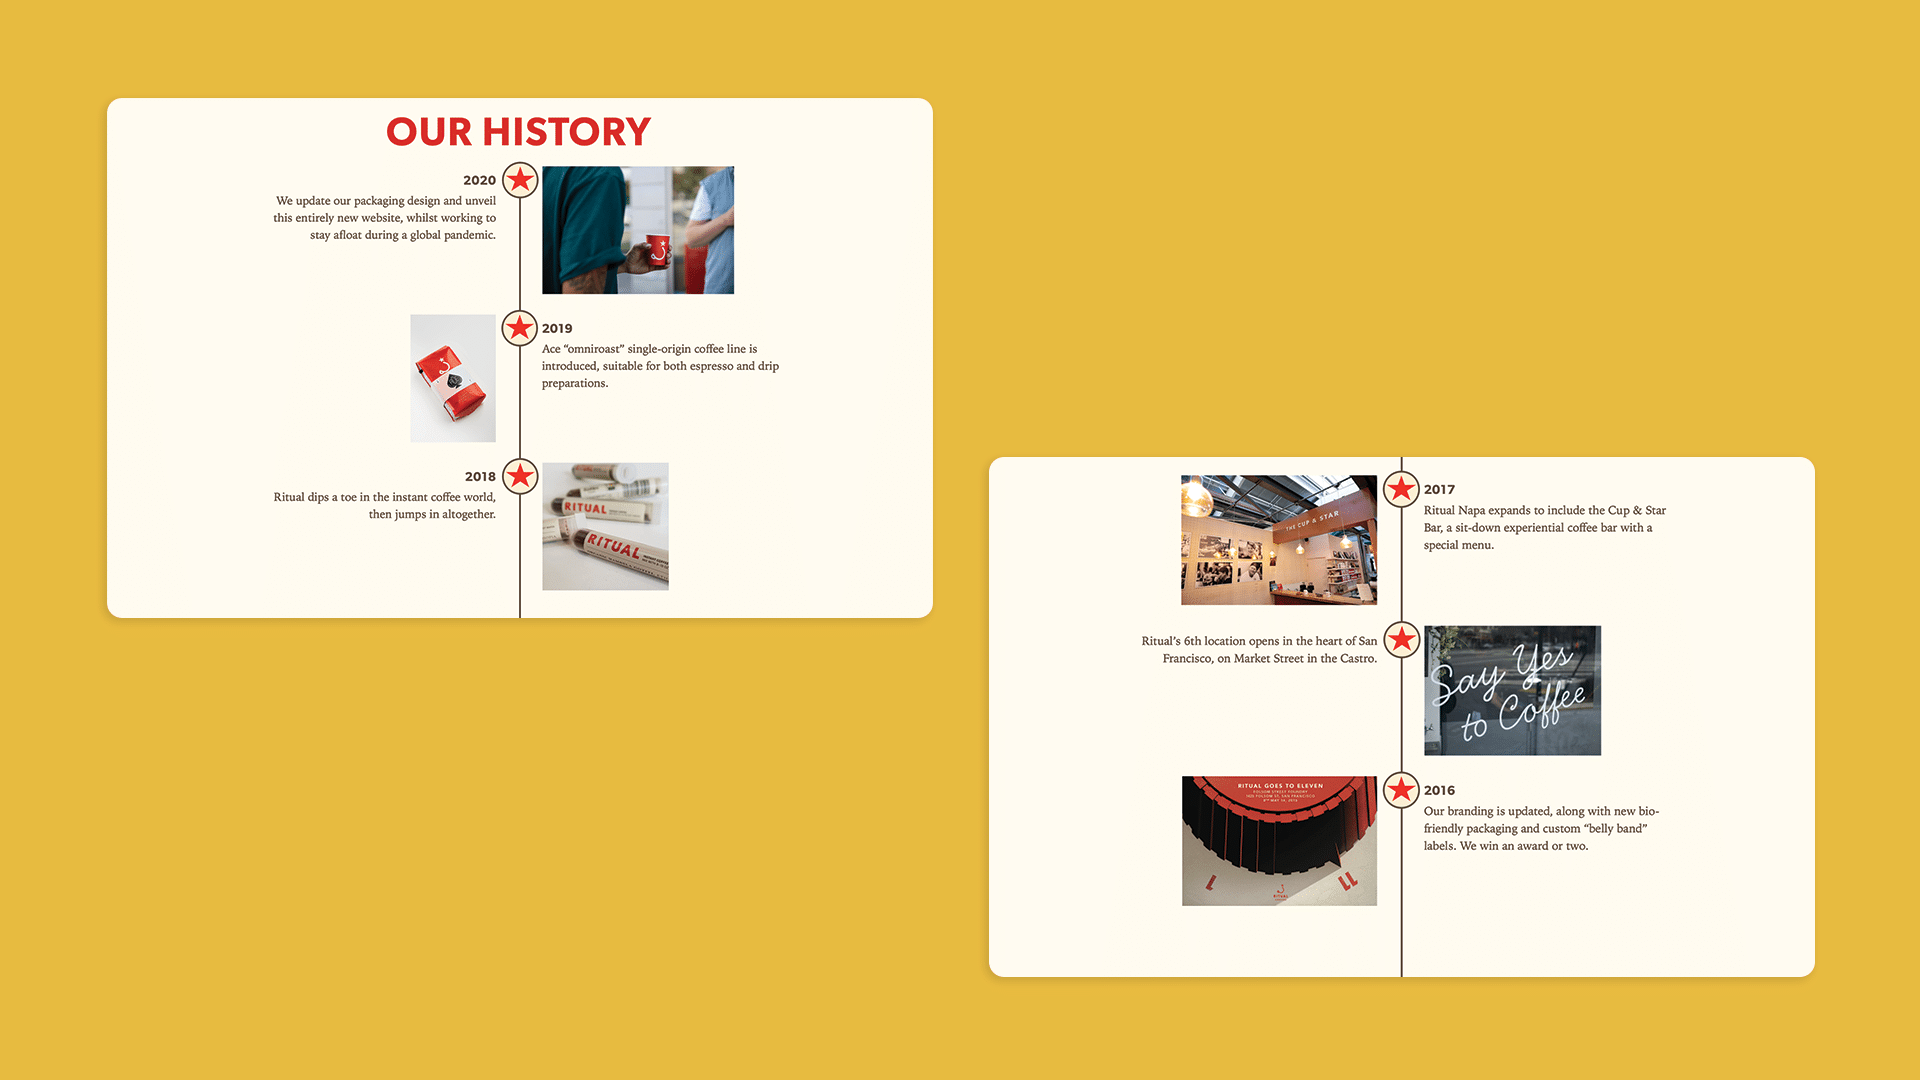 Ritual's Our History page